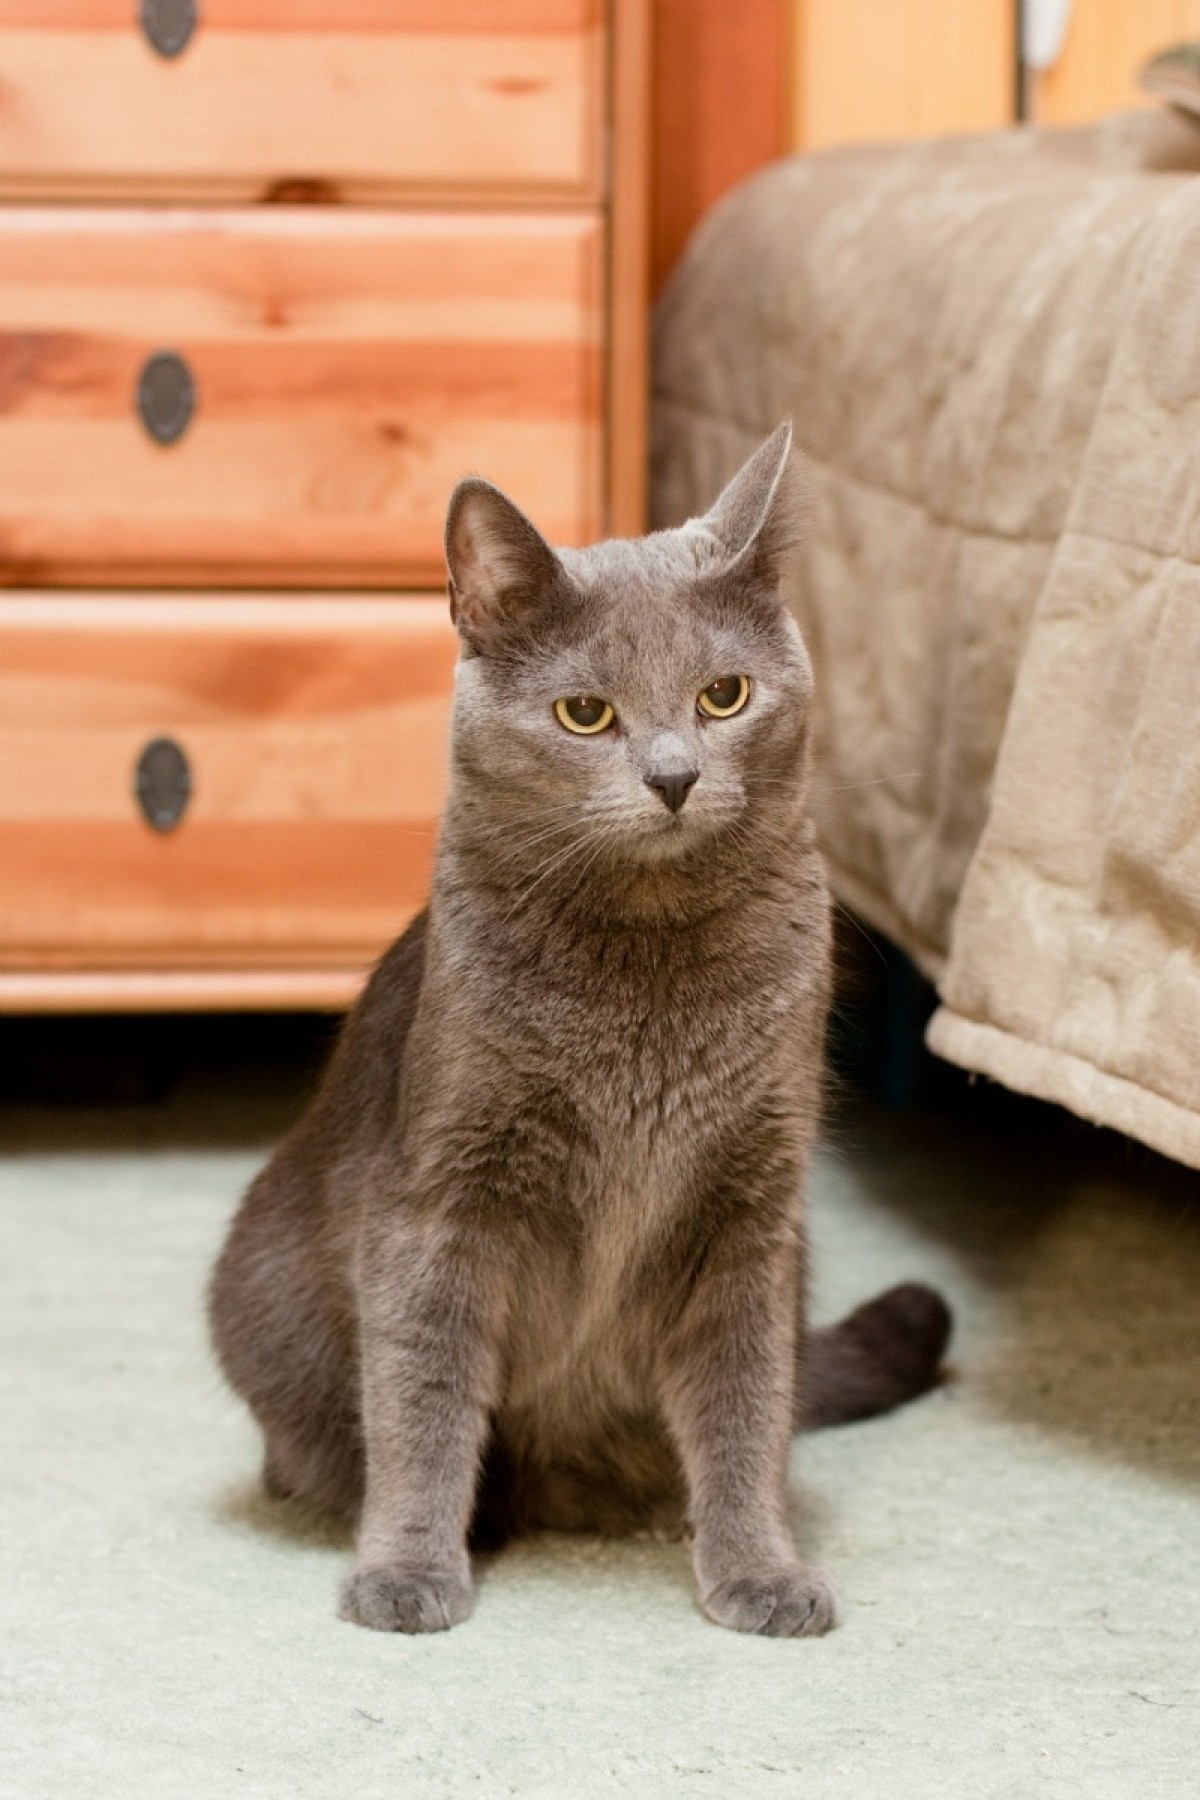 Removing Cat Pee and Odor from Carpet